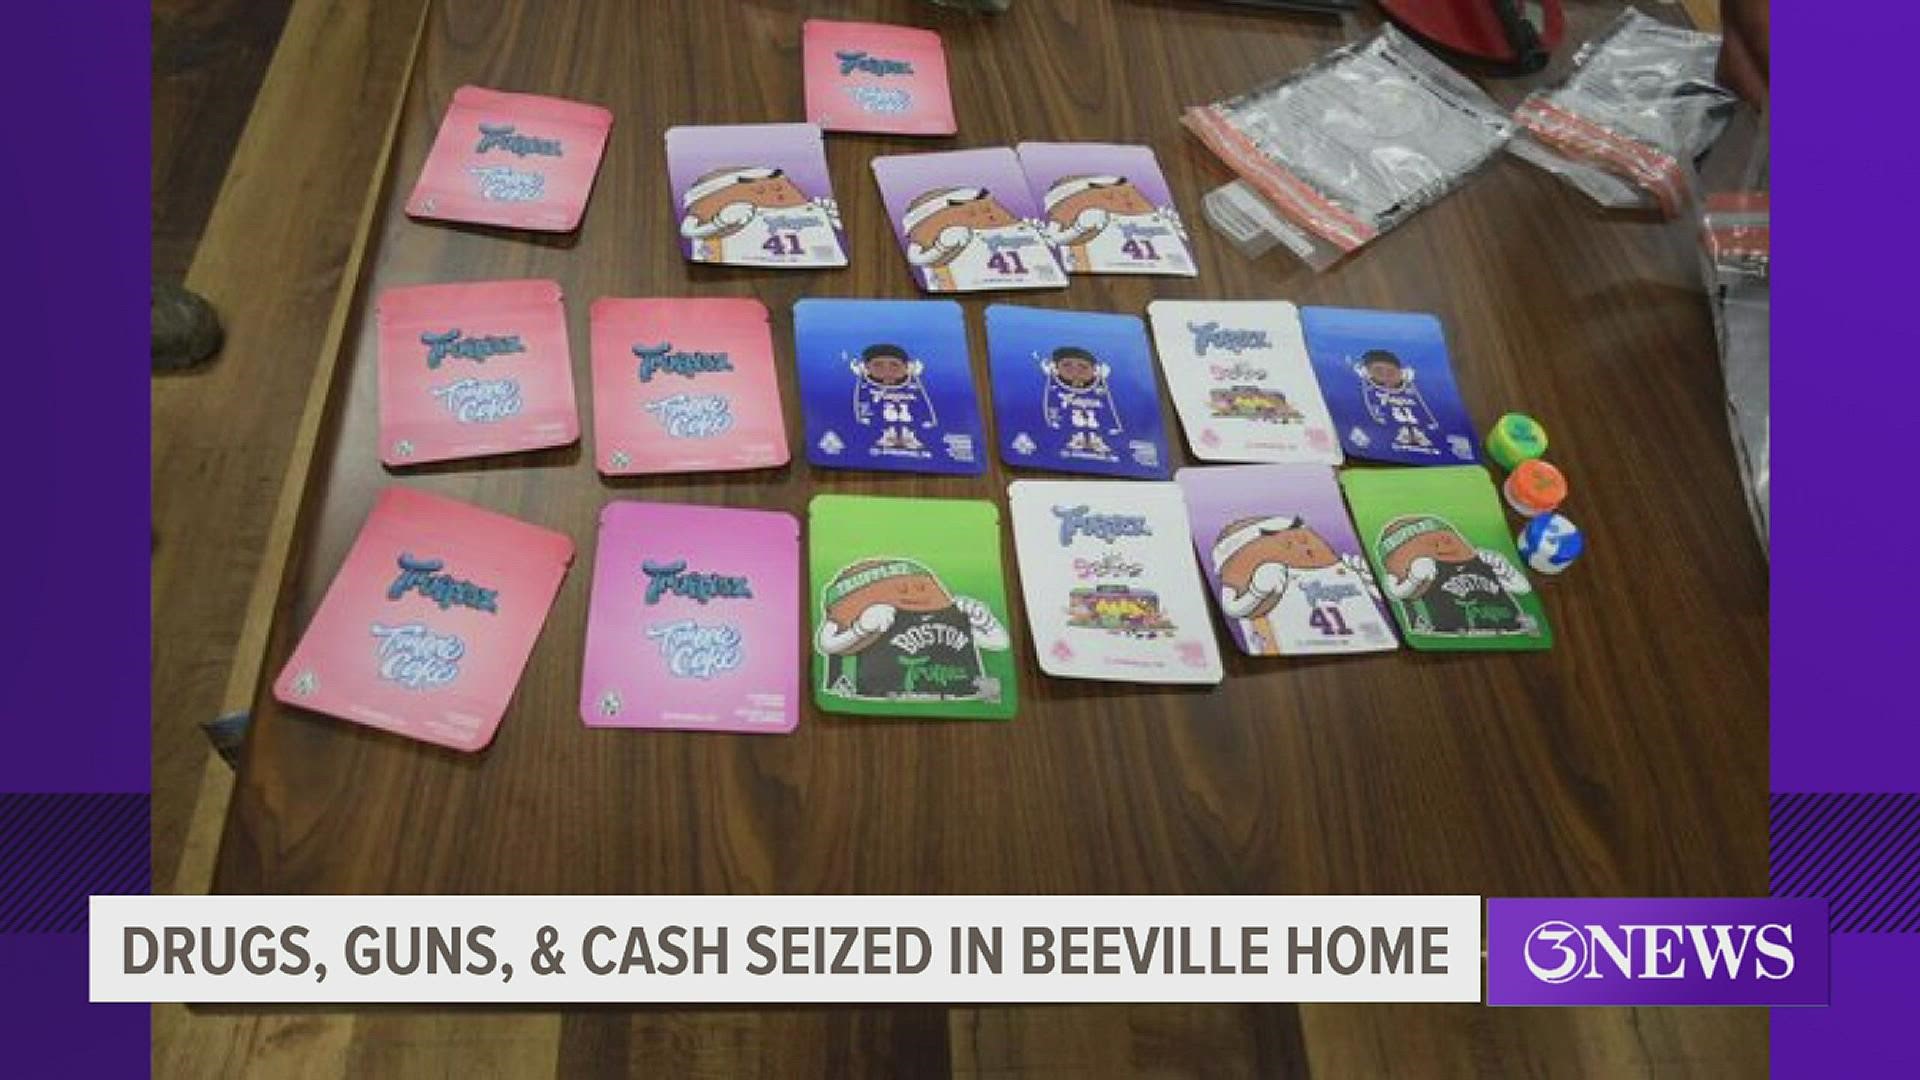 Some of the drugs found Wednesday were packaged in clear bags, but a considerable amount were found in packages with cartoon characters on them.